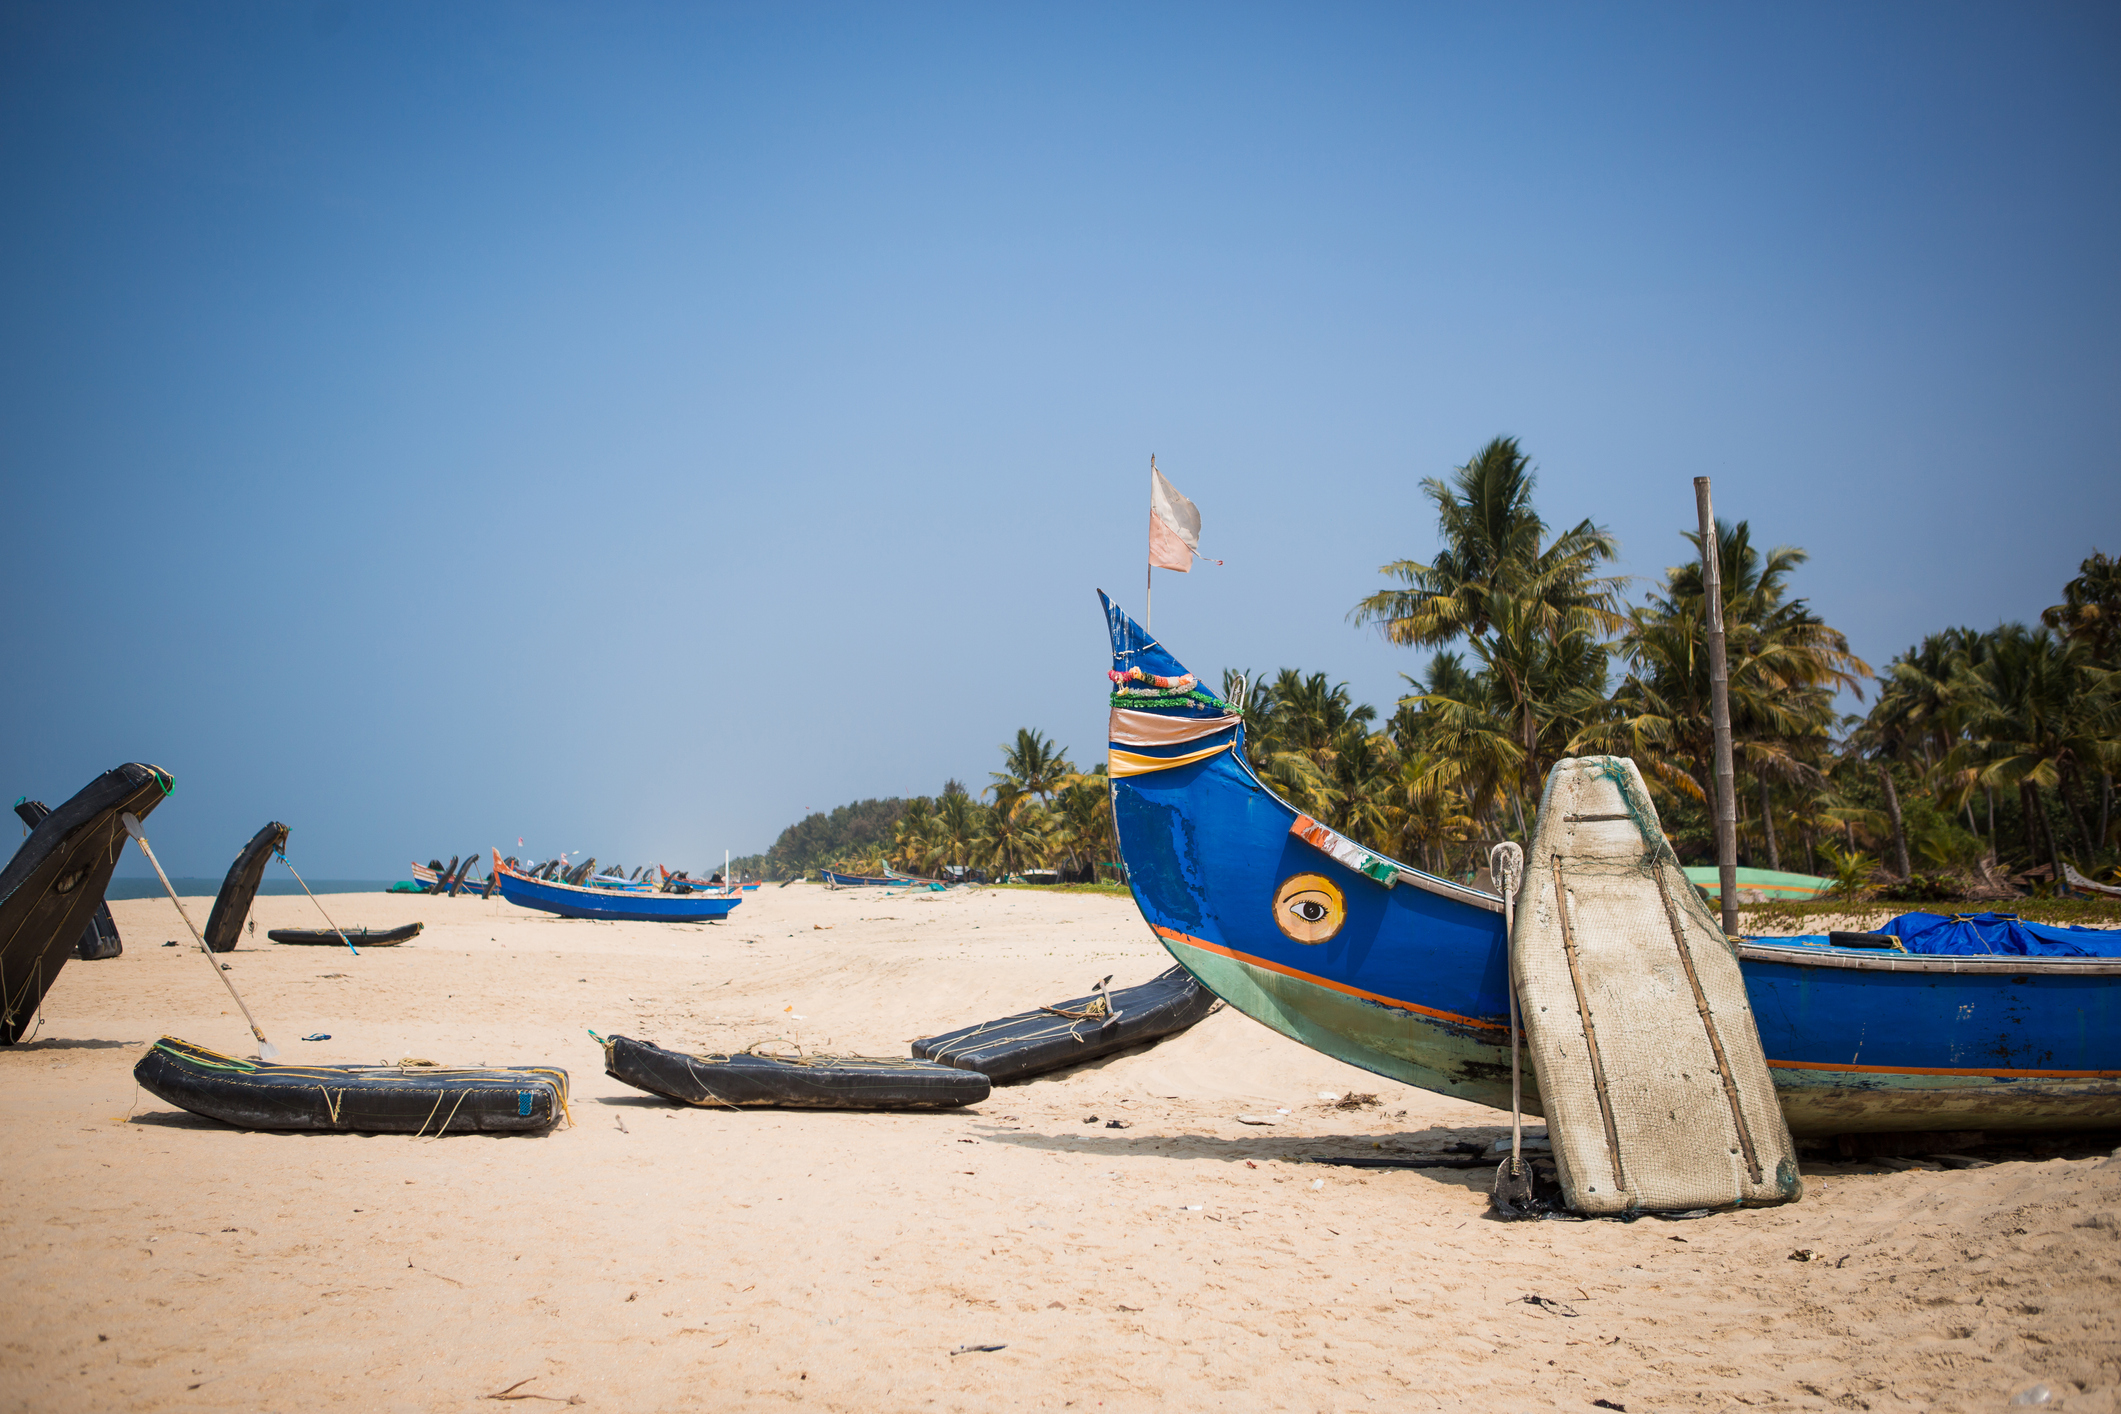 Witness remarkable Indian sights like this white-sand beach dotted with fishing boats in Mararikulam when you take a tailor-made holiday with Alfred&.